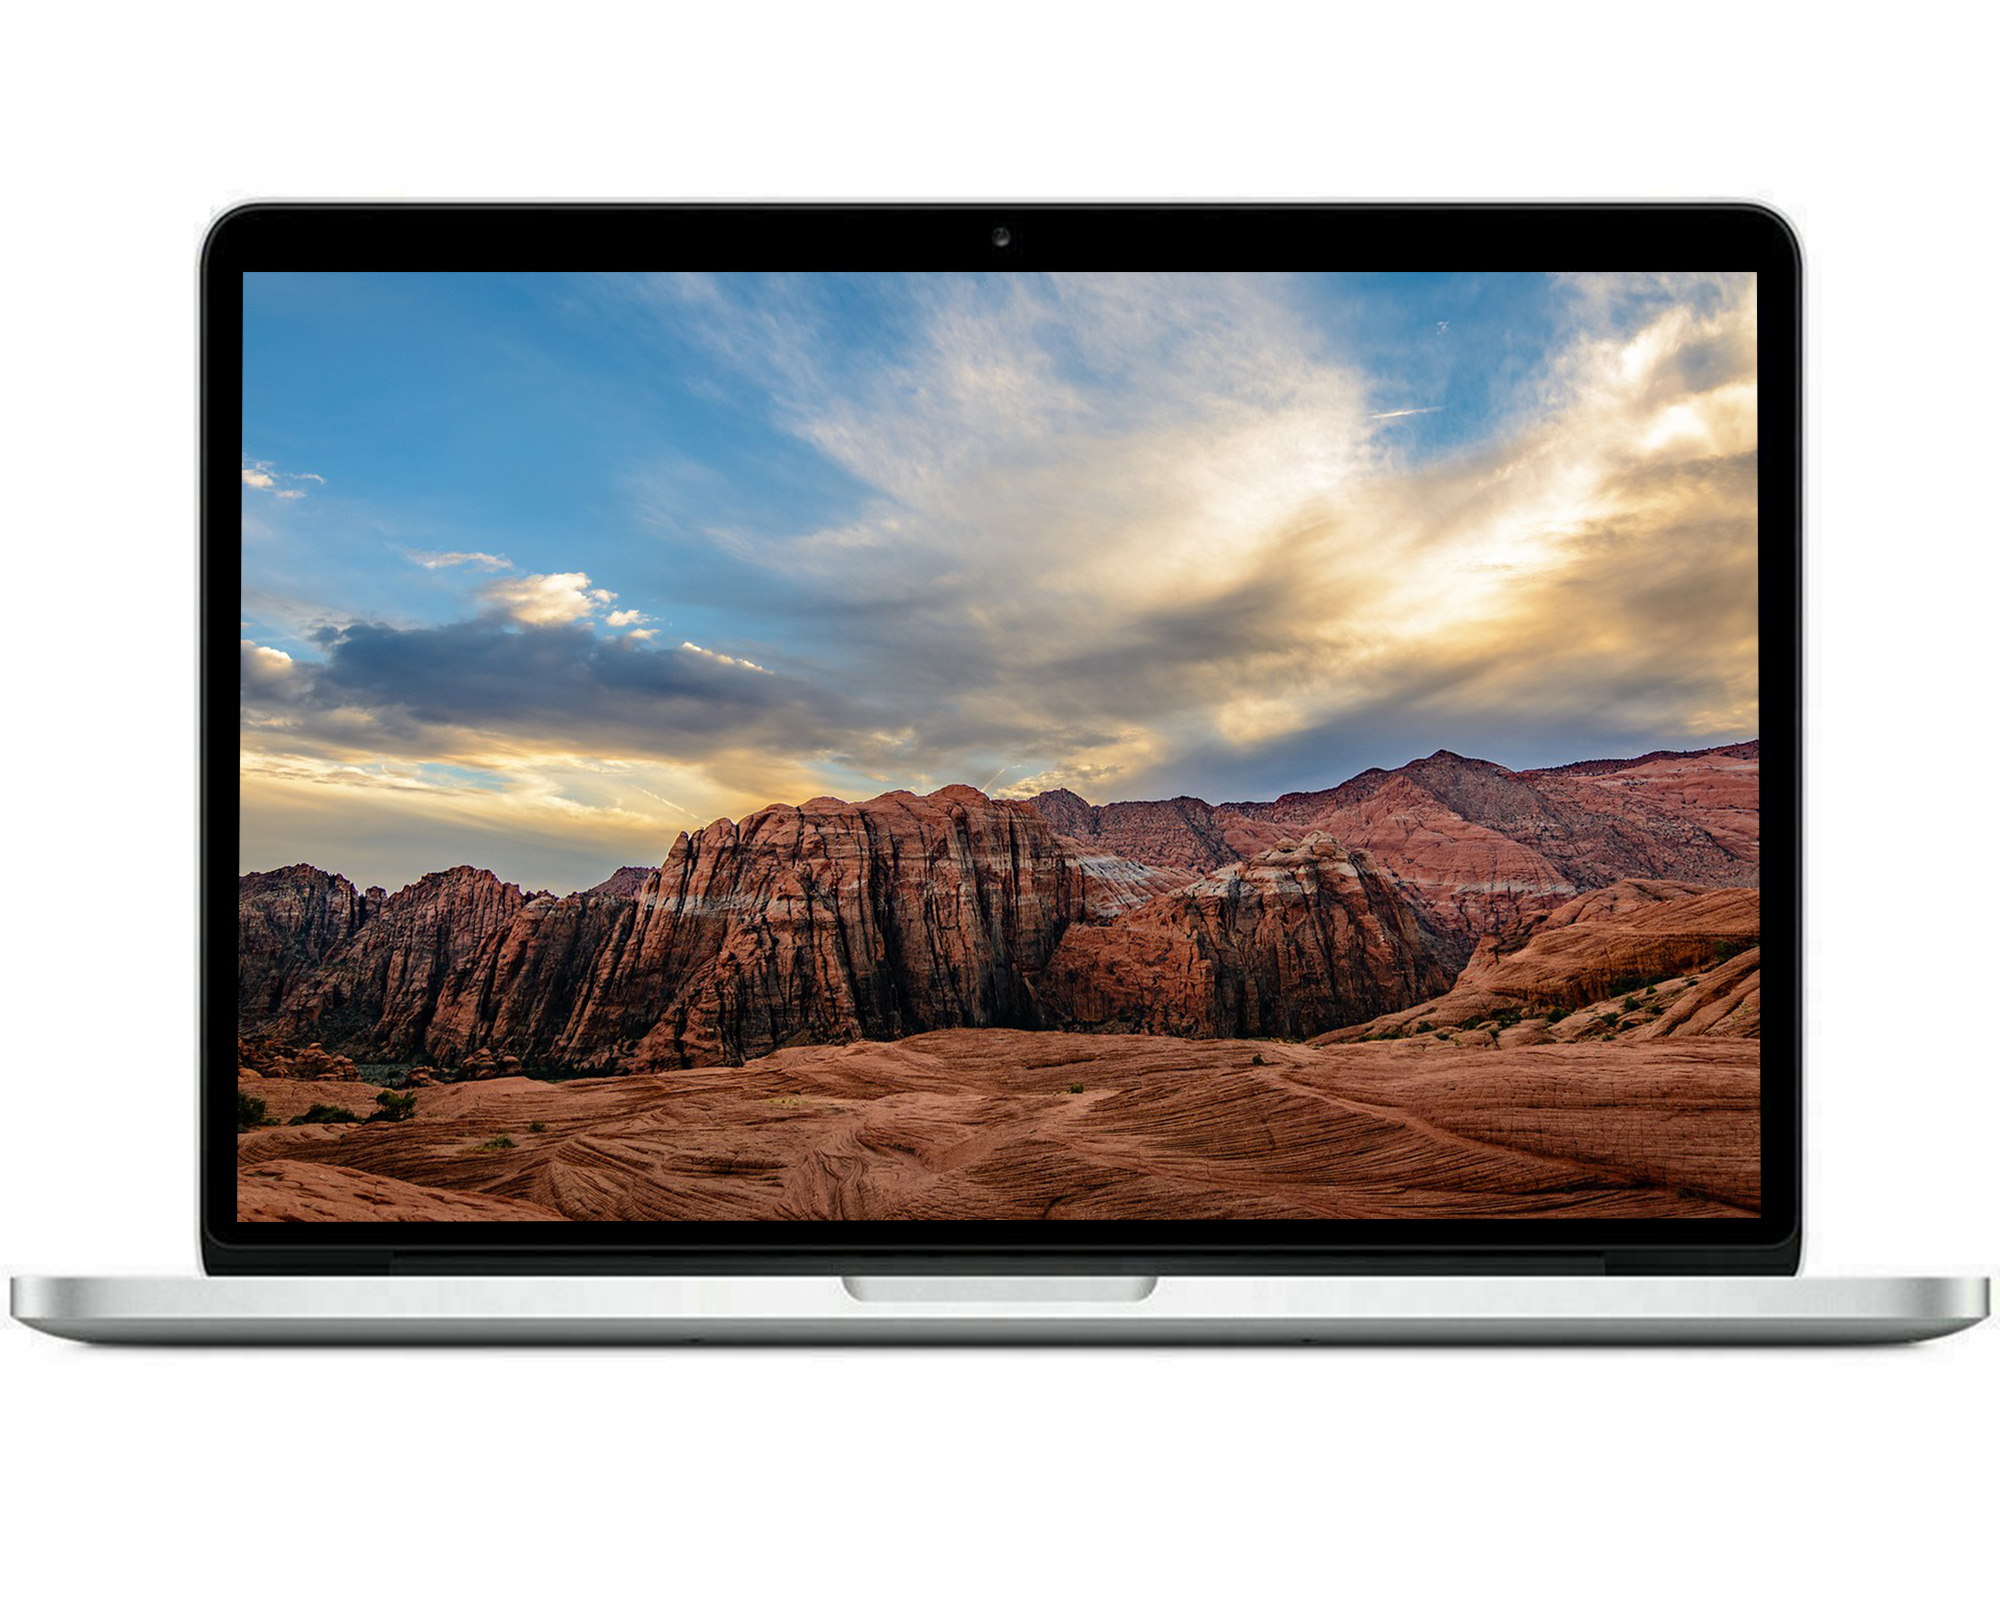 Restored | Apple MacBook Pro | 8GB RAM | 13.3-inch | 128GB SSD | Bundle: USA Essentials Bluetooth/Wireless Airbuds, Black Case, Wireless Mouse By Certified 2 Day Express - image 4 of 5